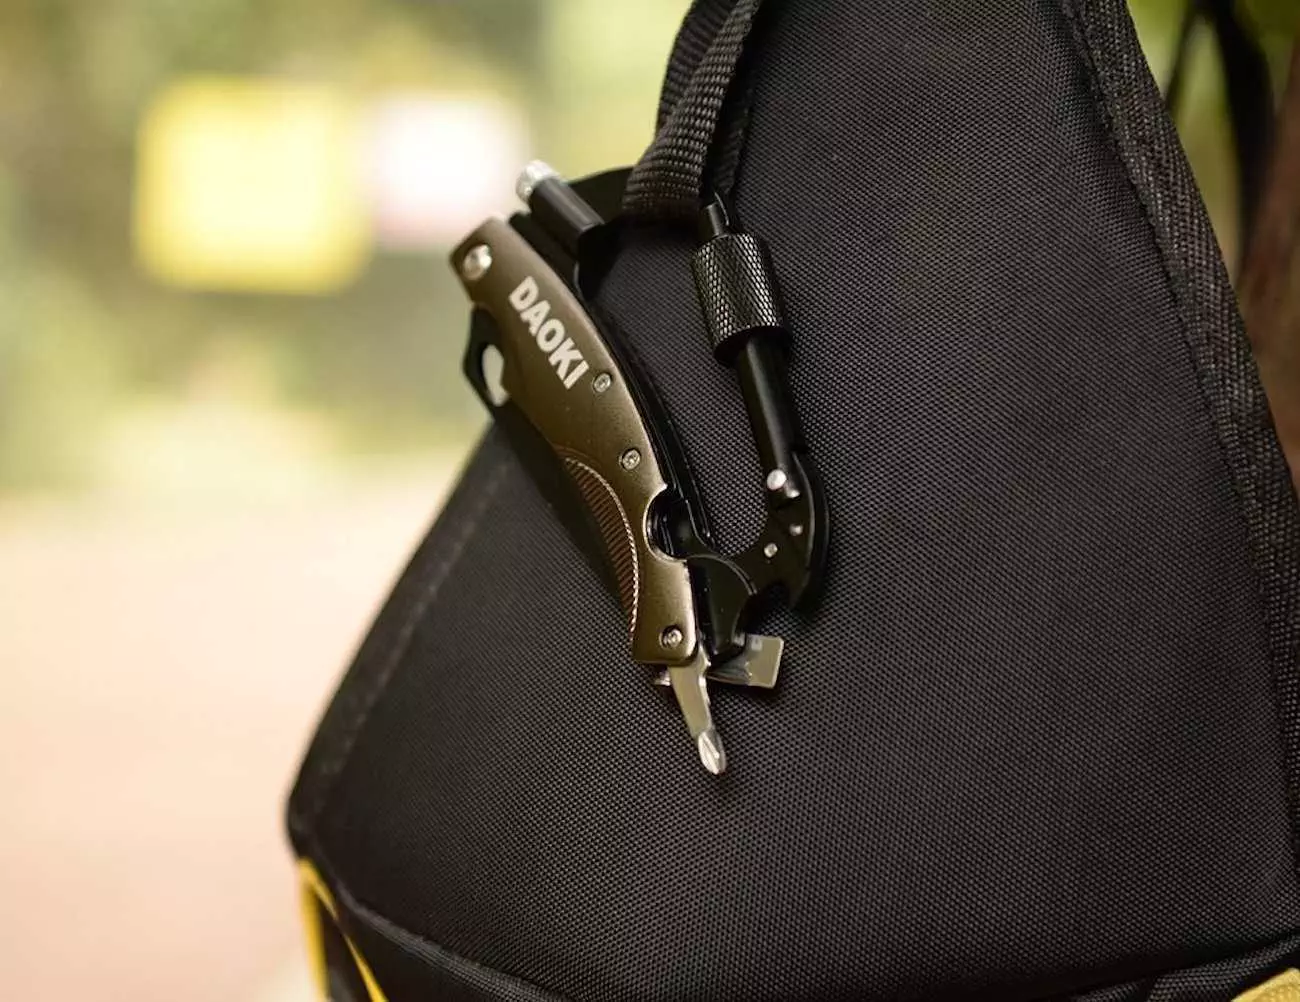 Daoki 7In1 Multifunctional Carabiner Is A Low Maintenance Product